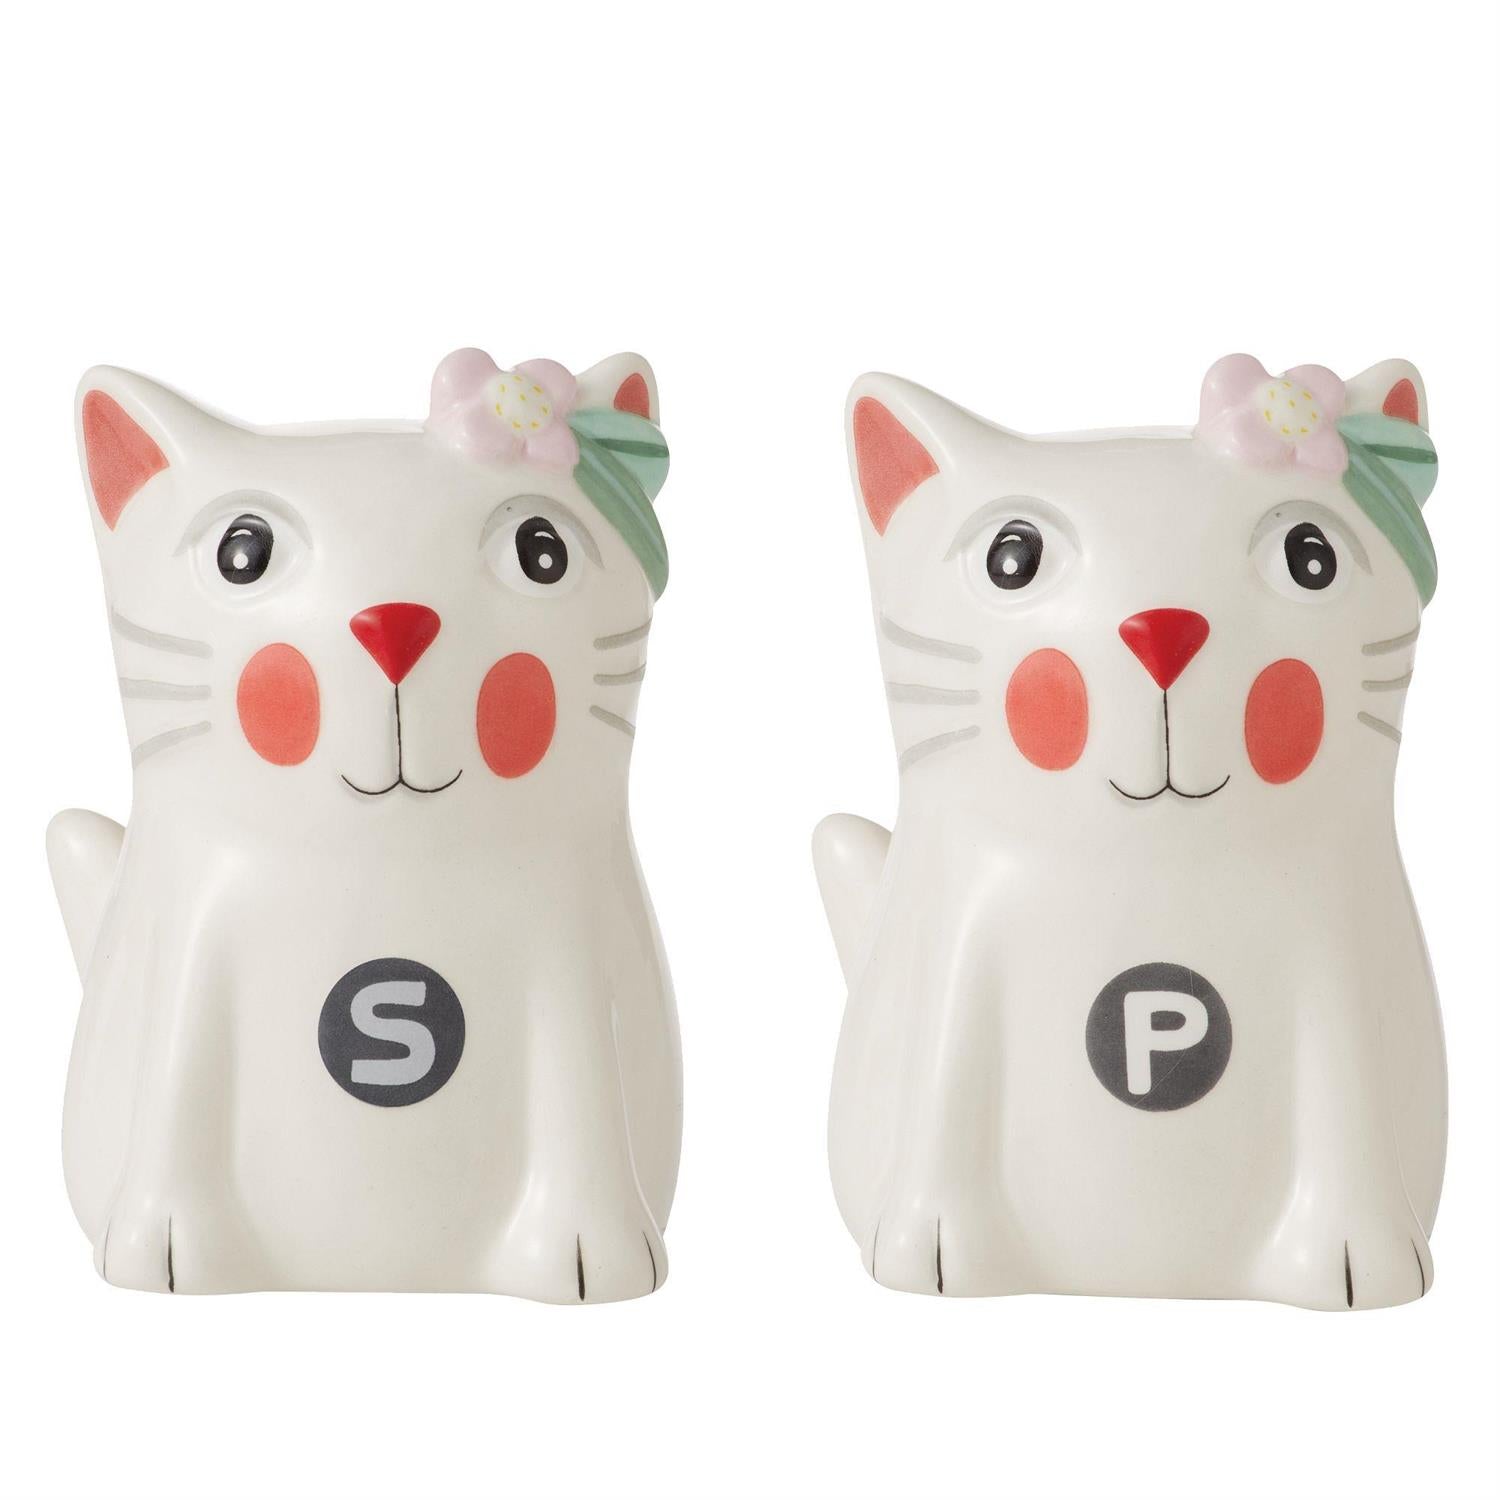 Kitty Cat Salt and Pepper Shakers Allend Designs